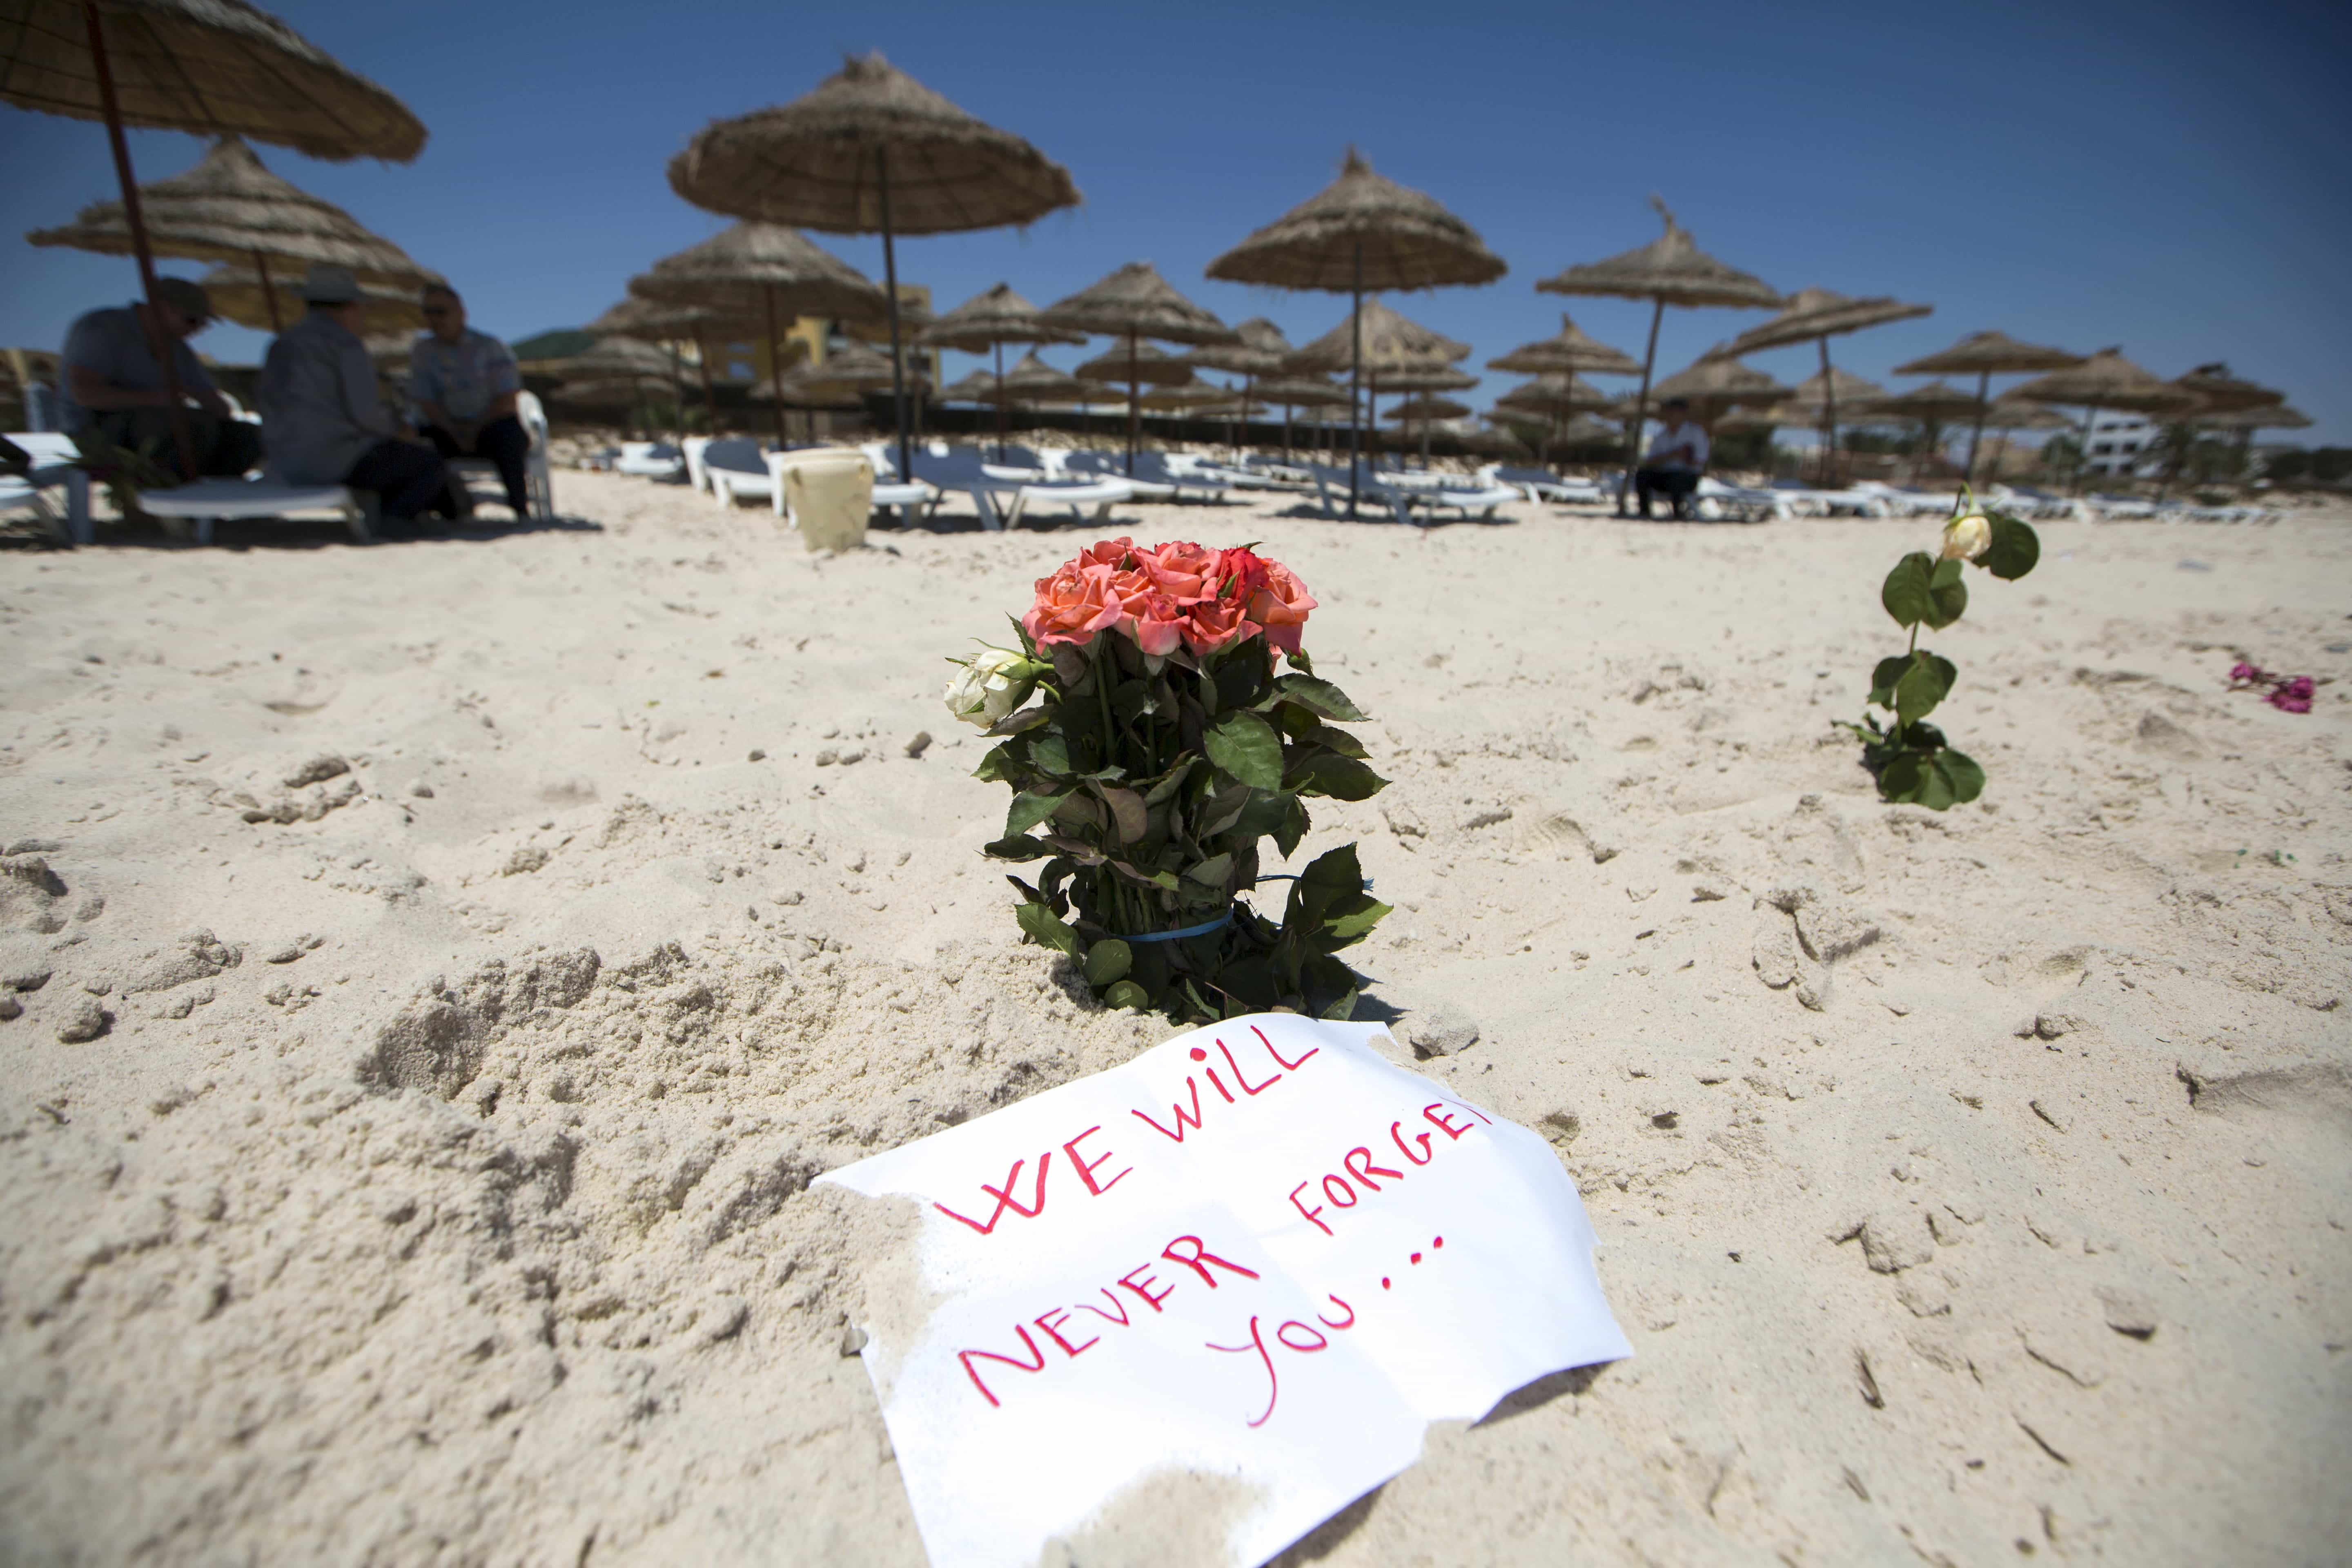 Flowers are laid at the beachside of the Imperial Marhaba resort, which was attacked by a gunman in Sousse, Tunisia, June 28, 2015, REUTERS/Zohra Bensemra